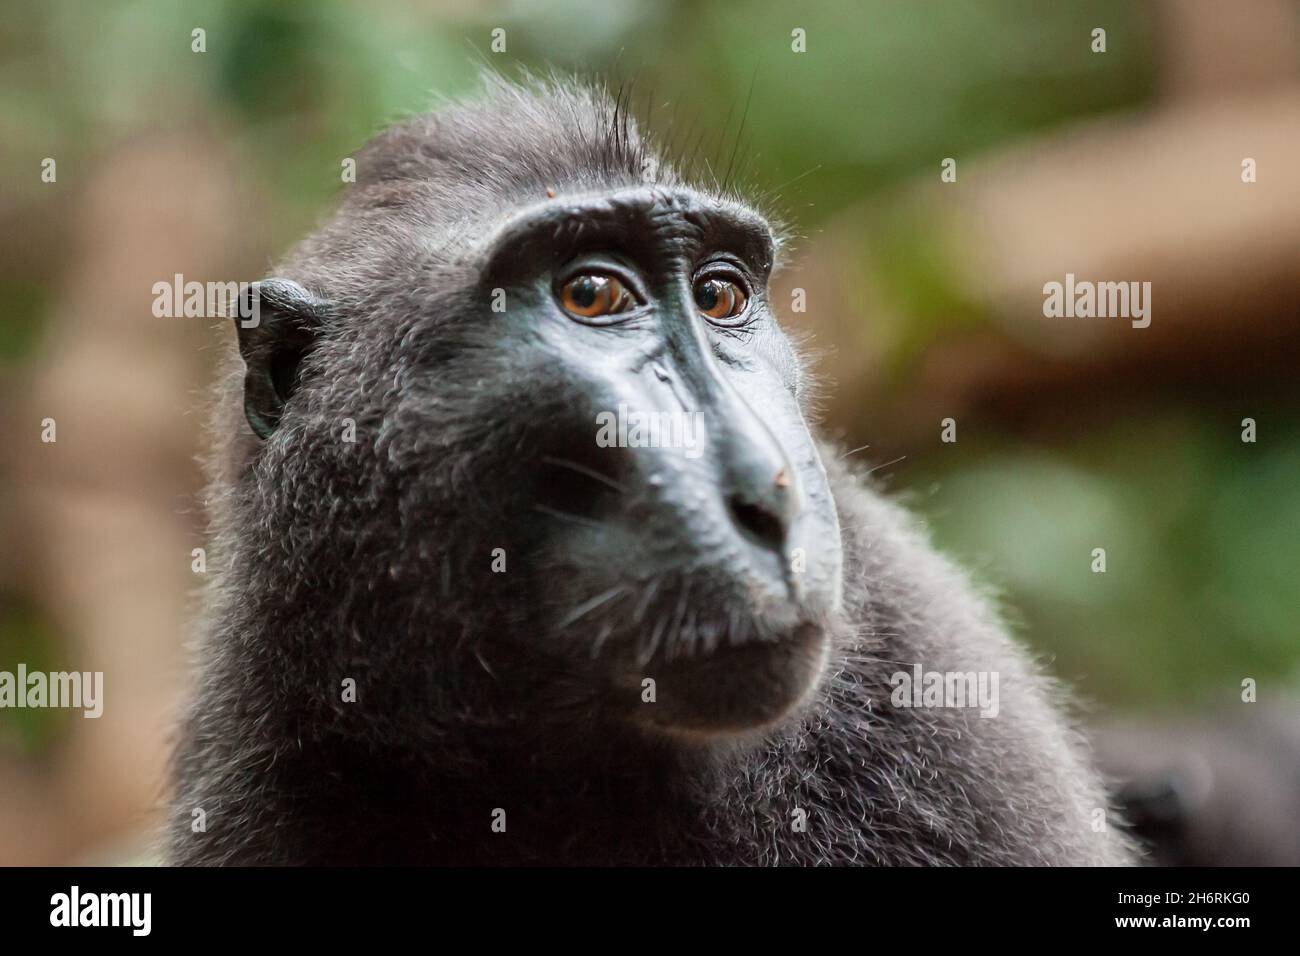 Close-up portrait of Crested black macaque with funny facial expression, Tangkoko National Park, Indonesia Stock Photo